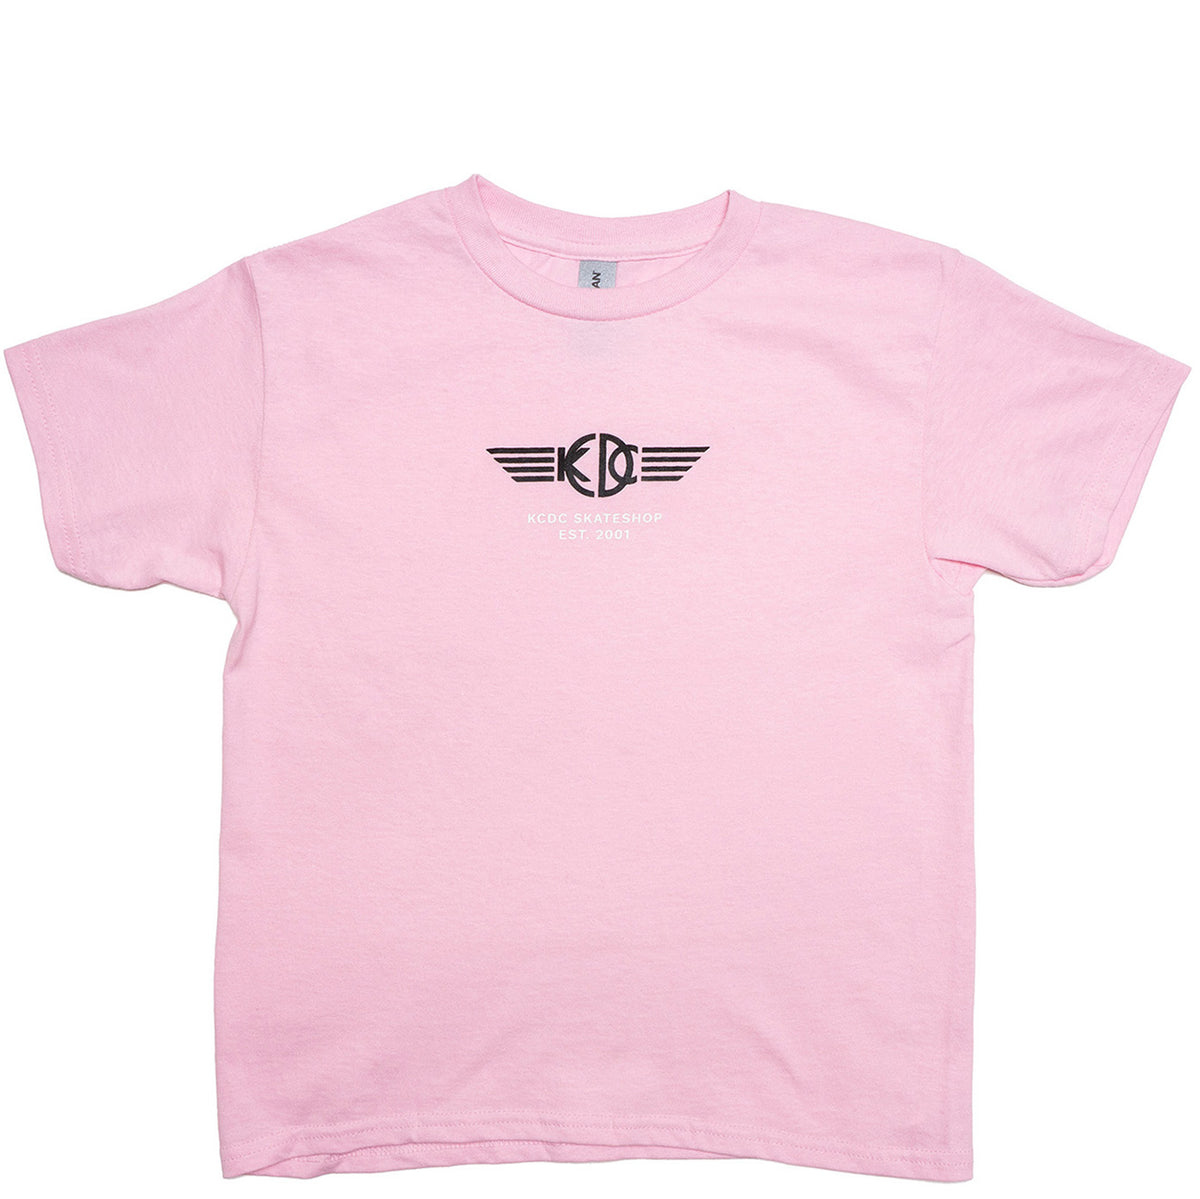 KCDC Shop Tee - Youth - Light Pink